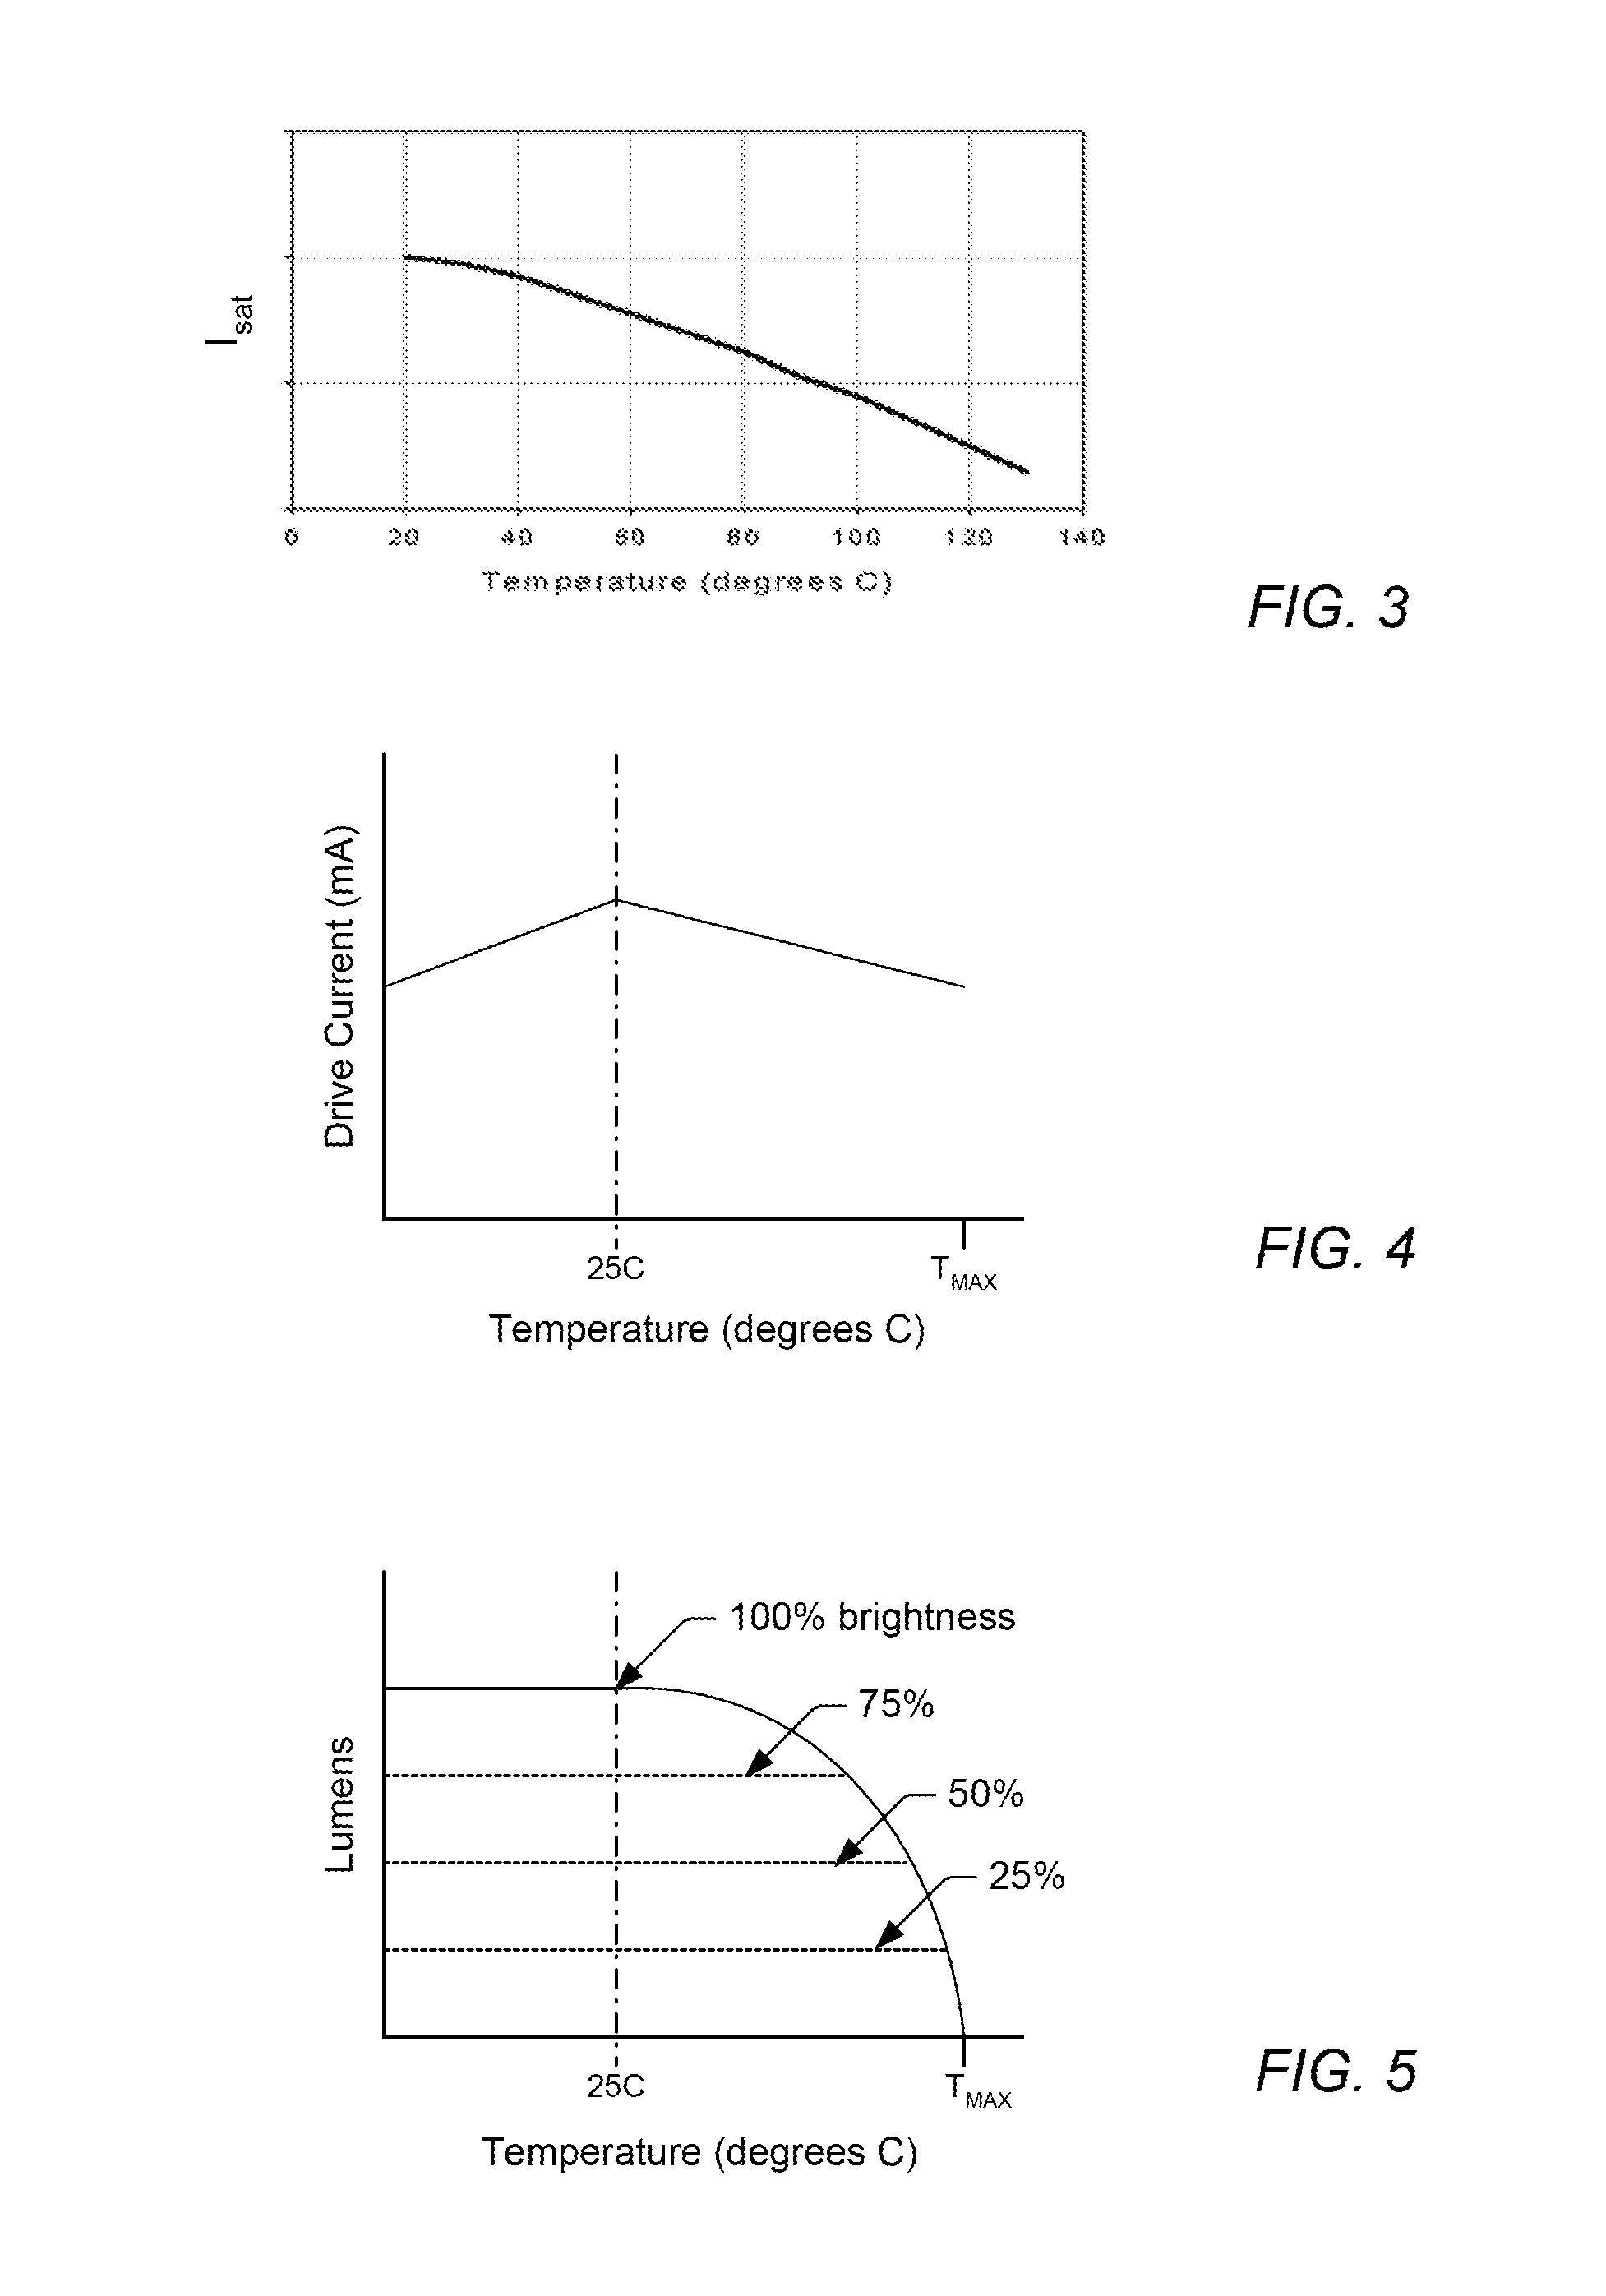 Illumination device and method for avoiding an over-power or over-current condition in a power converter